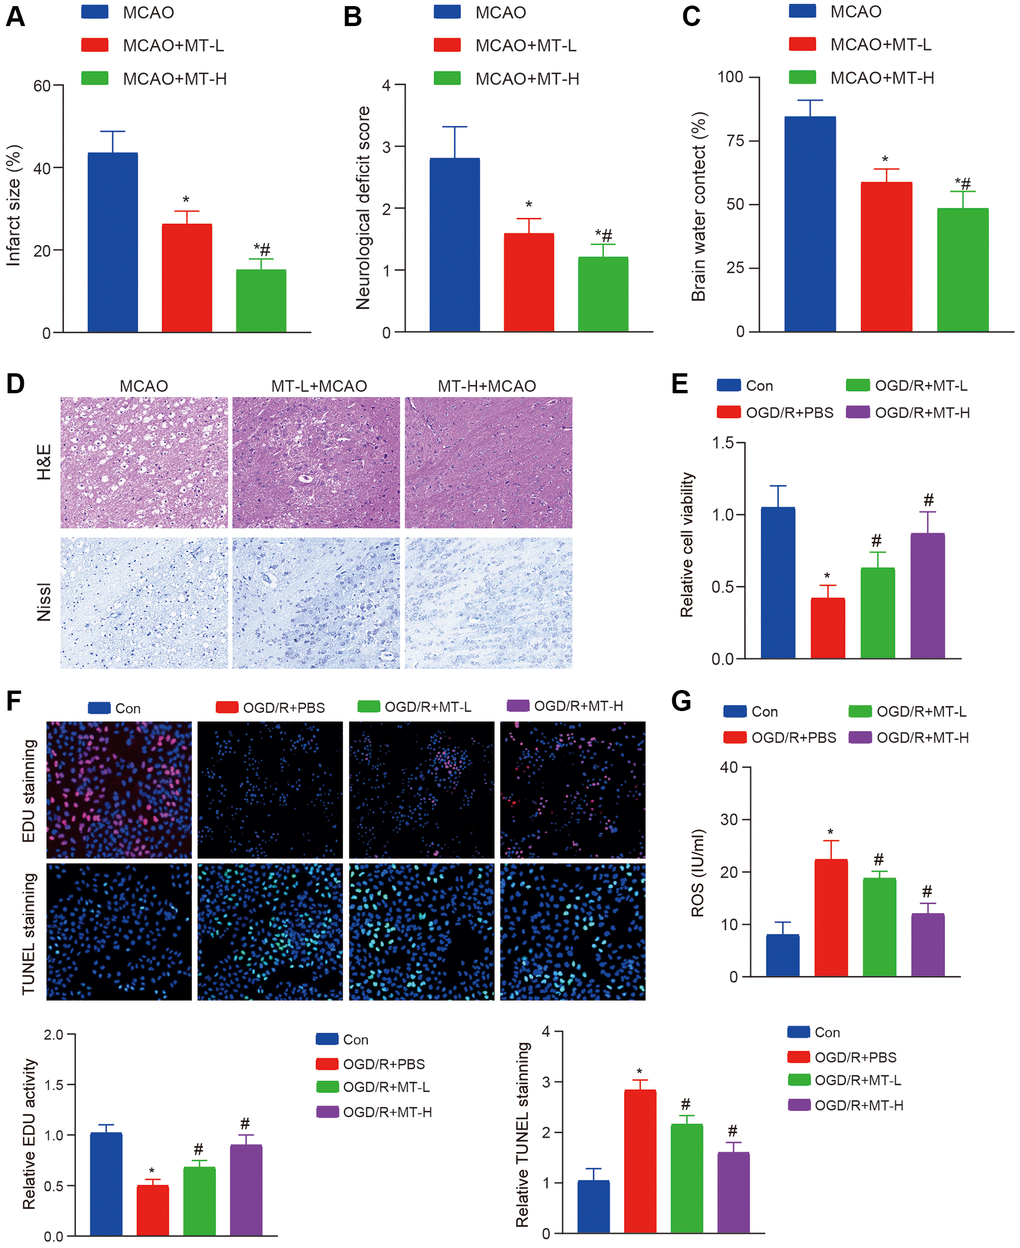 Melatonin improves brain tissue and neuronal damage caused by stroke. (A) TTC staining reveals that Melatonin at doses of 5 and 10 mg/kg significantly reduces the volume of infarction compared to the MCAO group. (B, C) The administration of Melatonin at doses of 5 and 10 mg/kg markedly decreases neural damage score and brain water content in comparison to the MCAO group. (D) H&E and Nissl staining demonstrate that Melatonin at doses of 5 and 10 mg/kg mitigates neuronal damage when compared to the MCAO group, with a more pronounced effect observed at a dose of 10 mg/kg. (E) CCK-8 assay indicates that treatment with Melatonin at concentrations of 0.5 and 1 mM enhances HT-22 cell viability relative to the OGD/R group. (F) The EdU and TUNEL assay indicate that treatment with Melatonin at concentrations of 0.5 and 1 mM enhances HT-22 proliferation and apoptosis relative to the OGD/R group. (G) DCFH-DA staining shows that exposure to Melatonin at concentrations of 0.5 and 1 mM reduces ROS levels compared to the OGD/R group. The data are presented as mean ± SD. Statistical significance is denoted by *P #P 